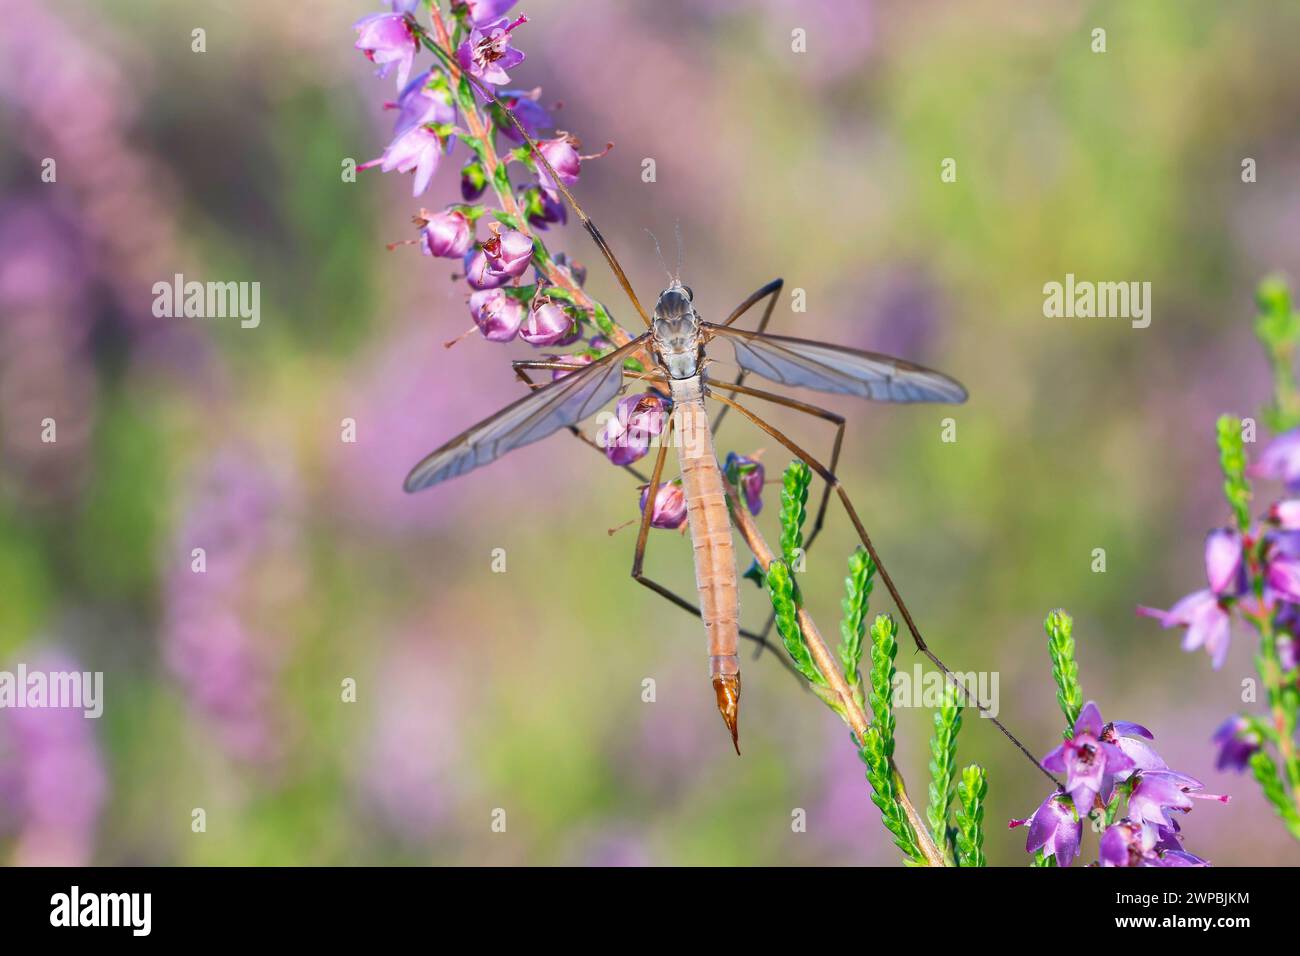 Meadow cranefly, Grey daddy-long-legs (Tipula paludosa), female sitting on heather, dorsal view, Germany Stock Photo